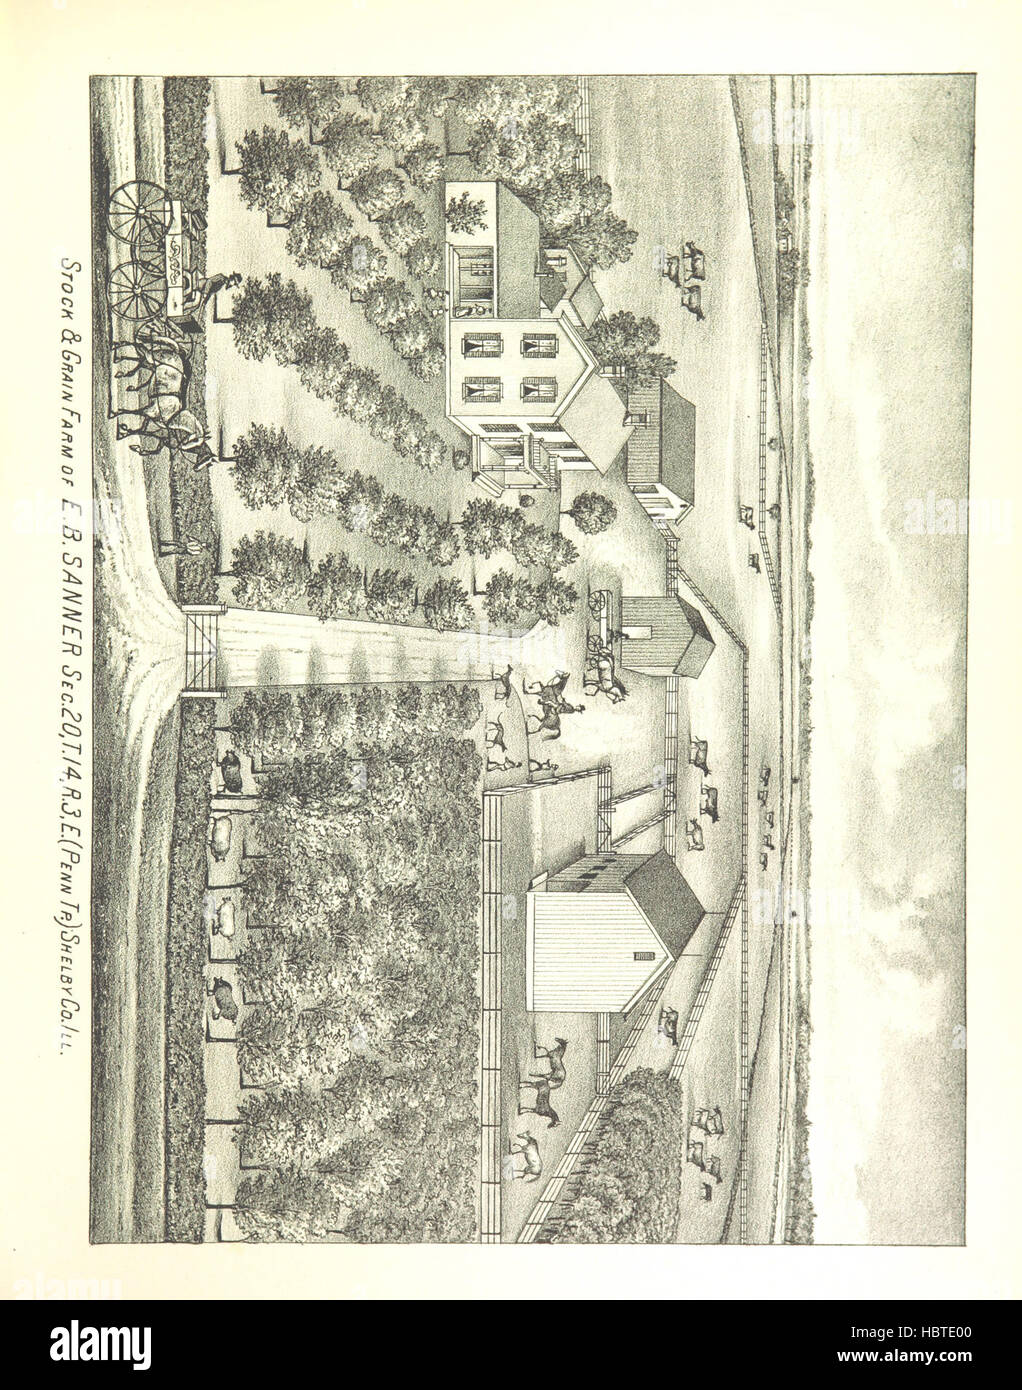 1763. Combined History of Shelby and Moultrie Counties ... With illustrations, etc Image taken from page 321 of '1763 Combined History of Stock Photo